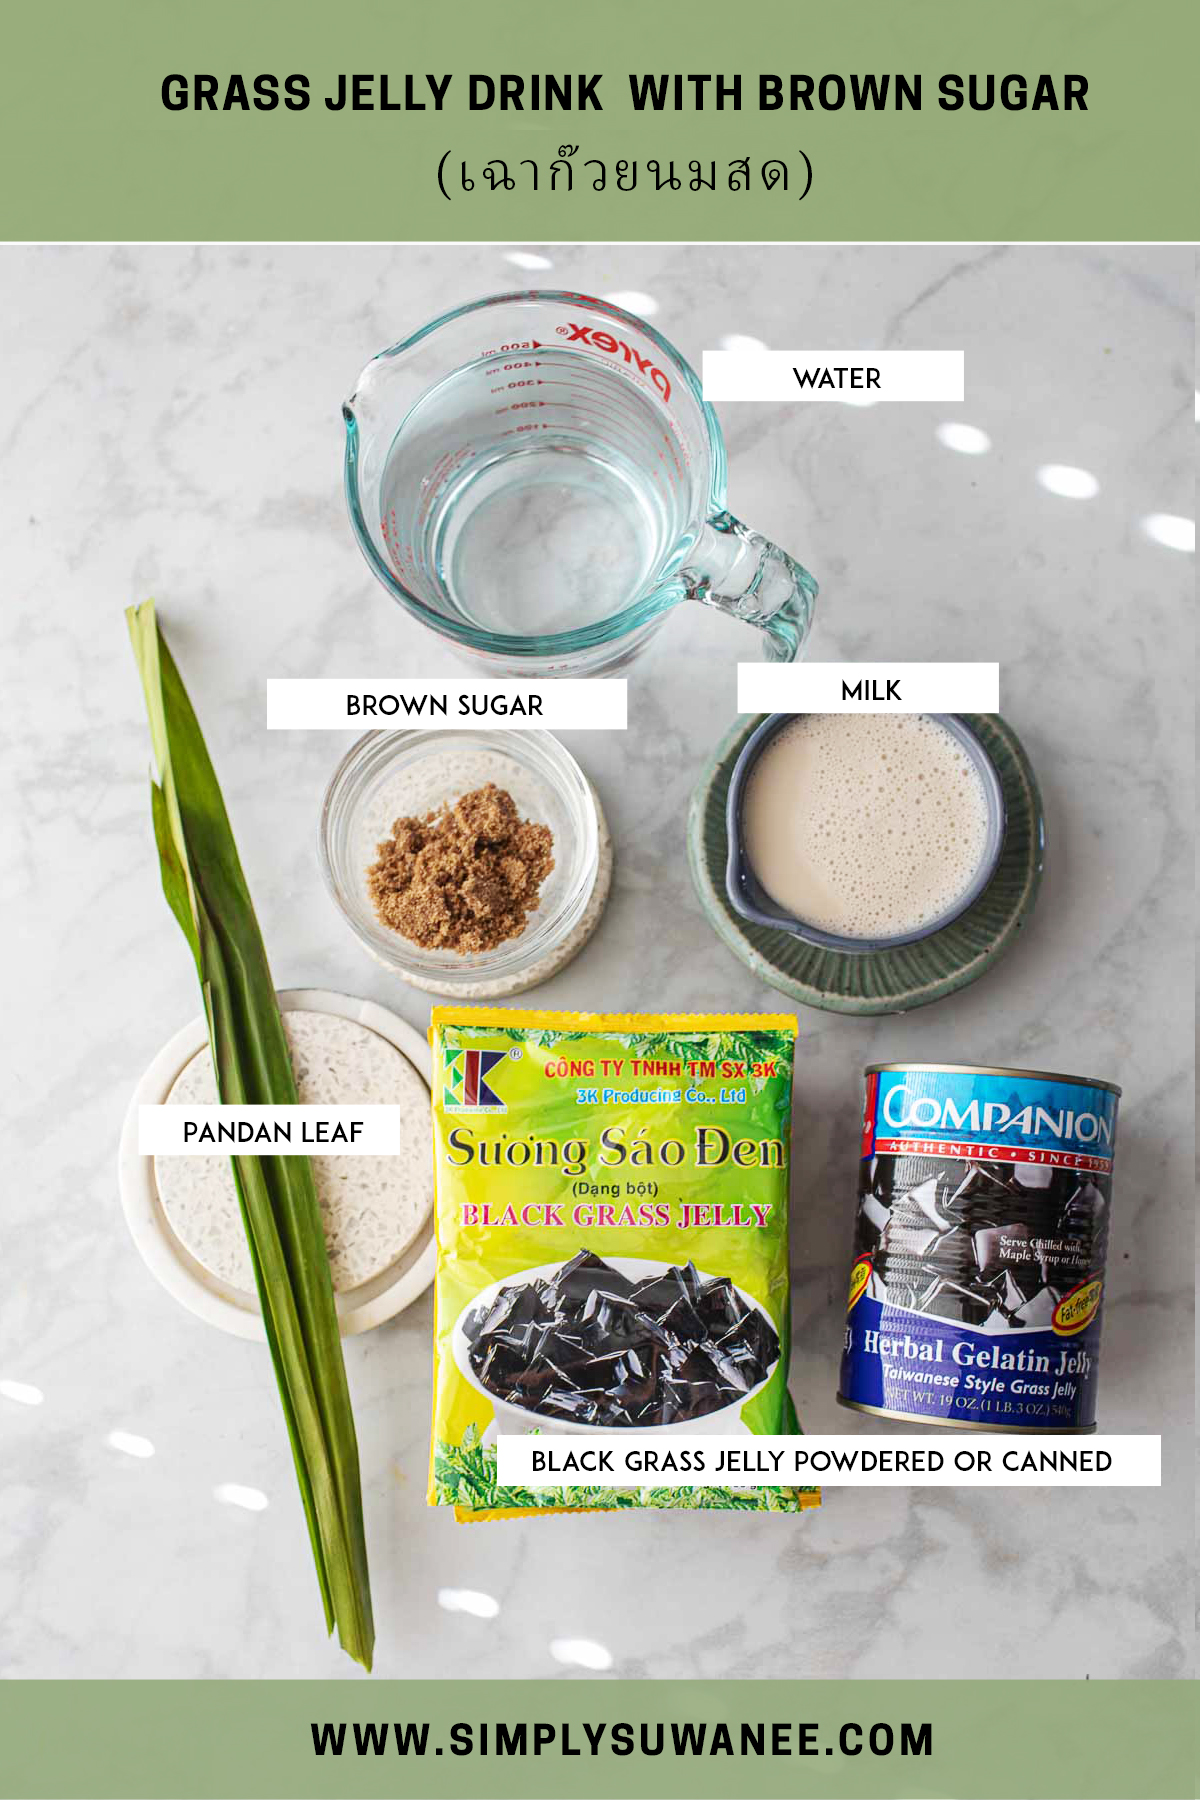 Ingredients for grass jelly drink.